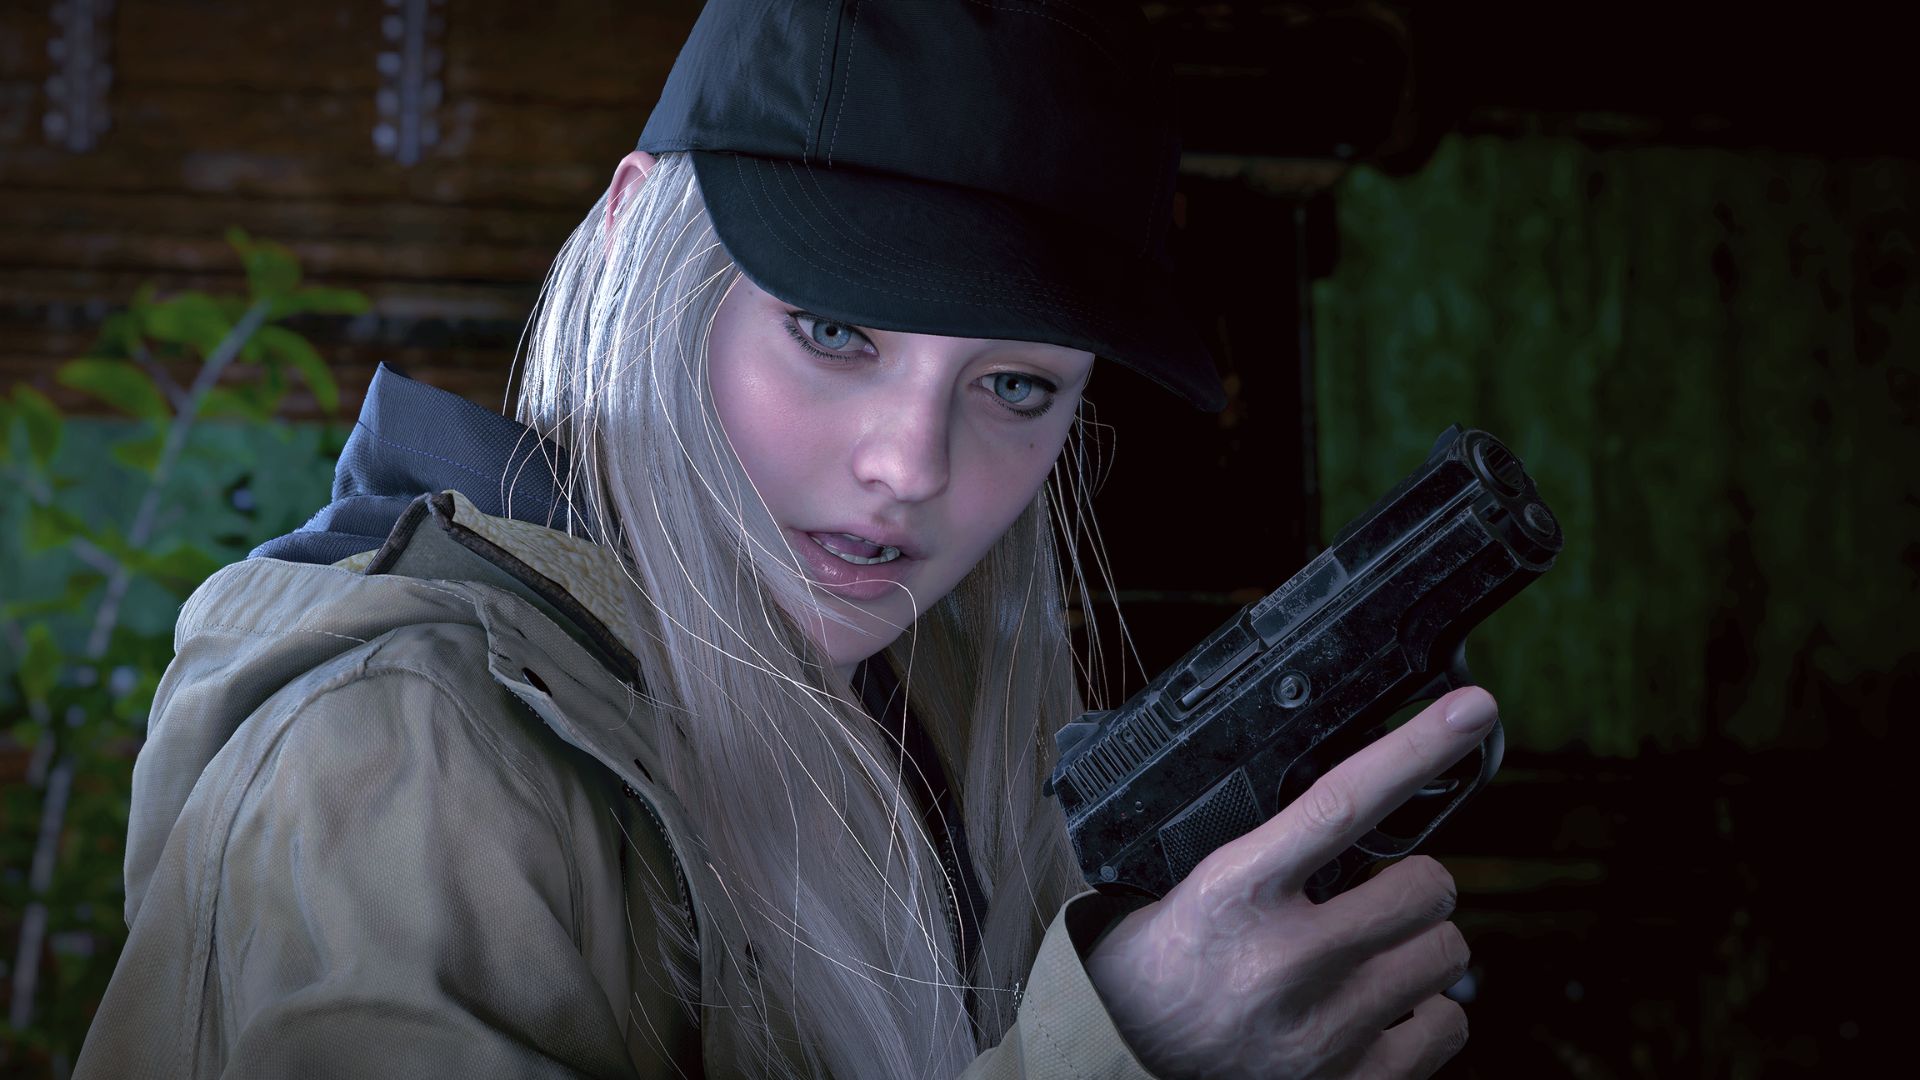 Resident Evil 9 will not focus on Ethan or Rose Winters, says Capcom